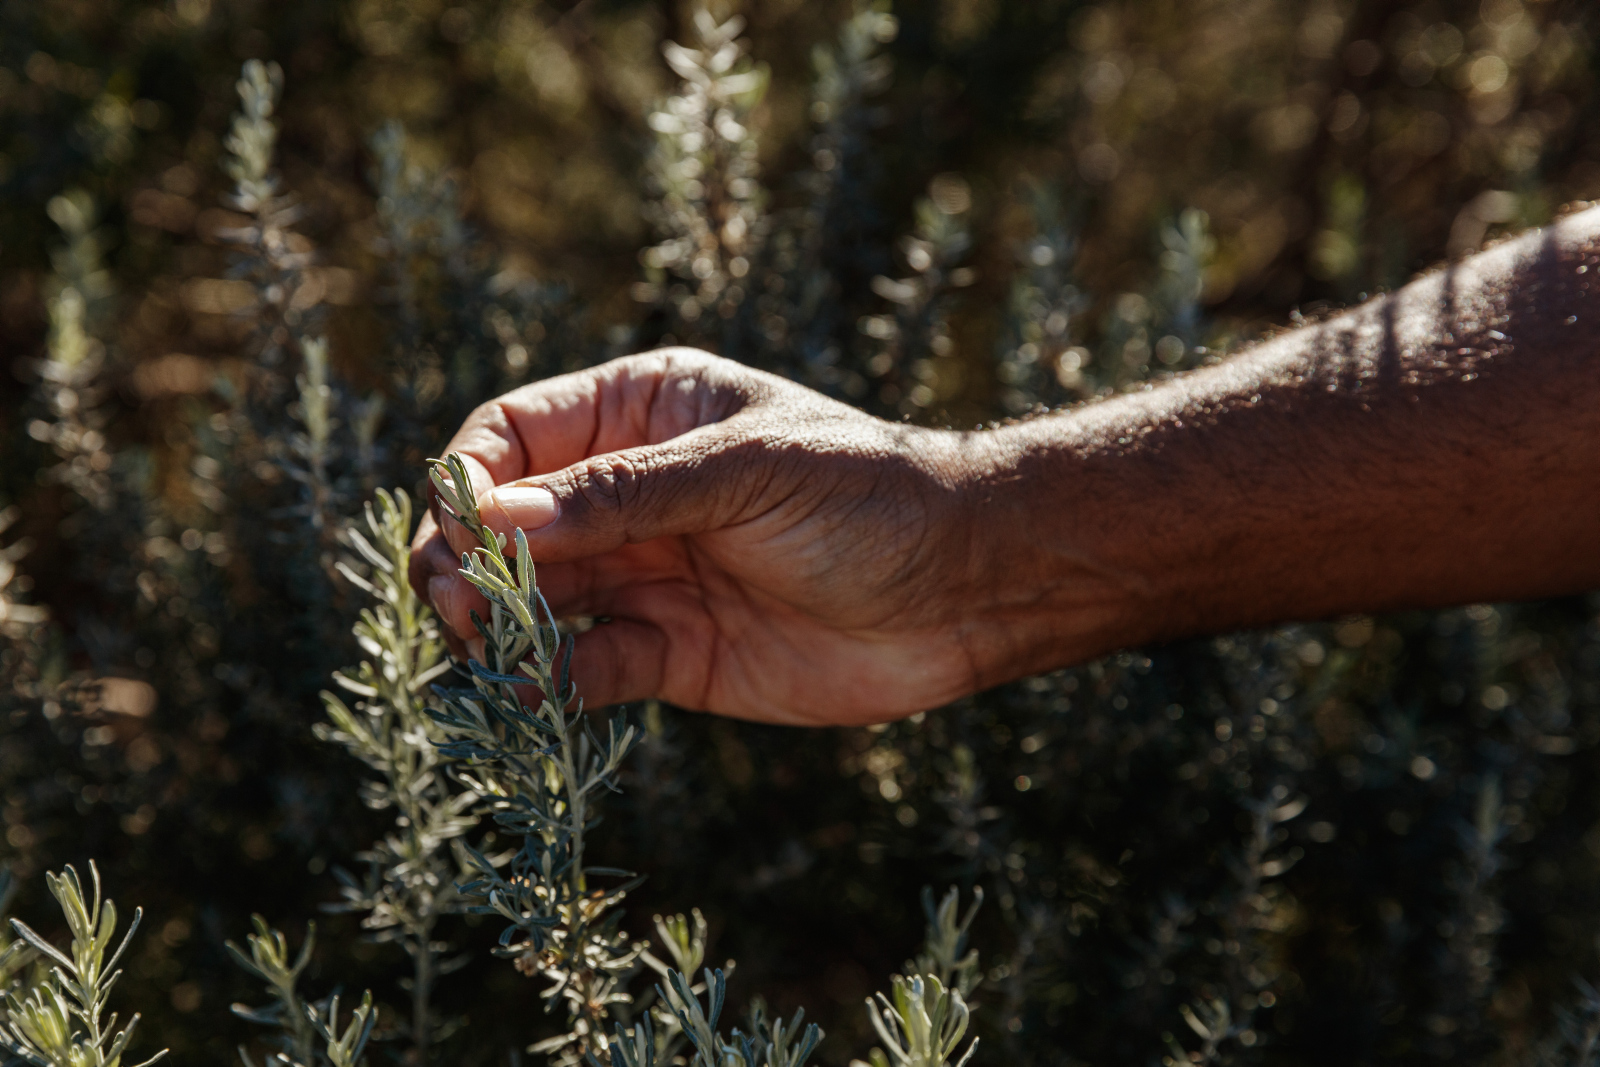 A hand grasps the tips of a native plant.